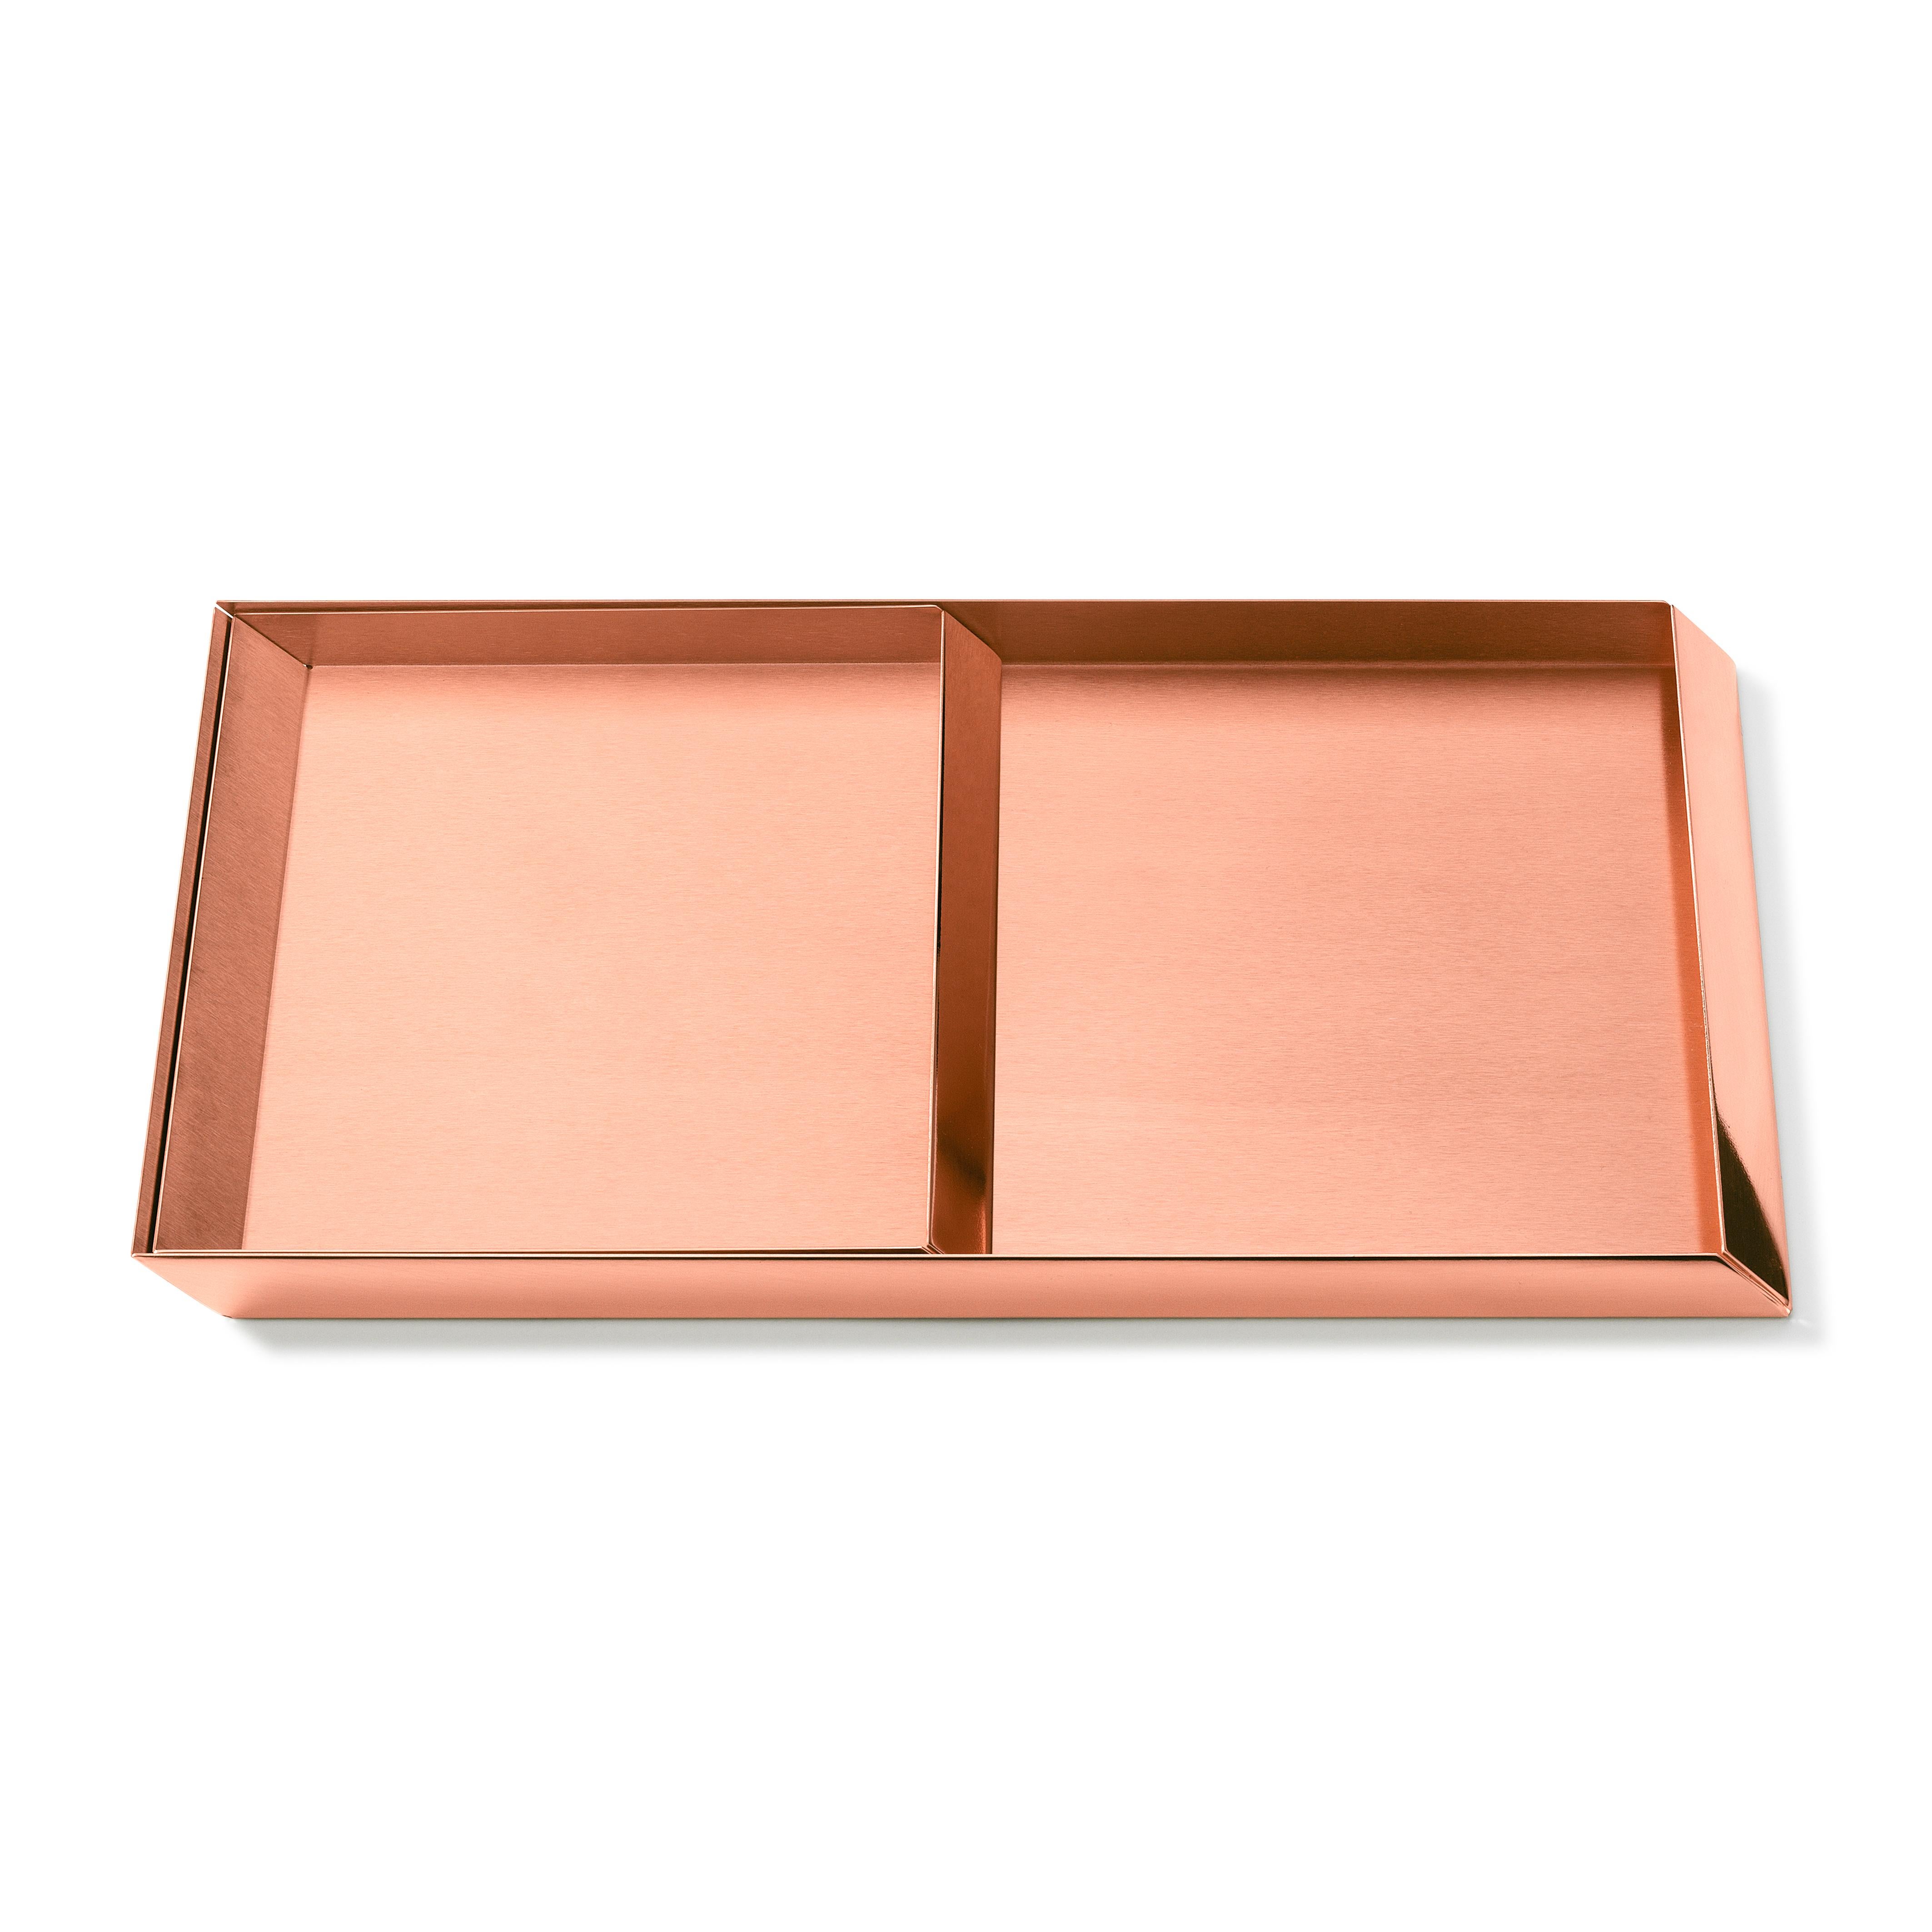 Modern Set of 2 Ghidini 1961 Axonometry Trays in Copper by Elisa Giovanni For Sale